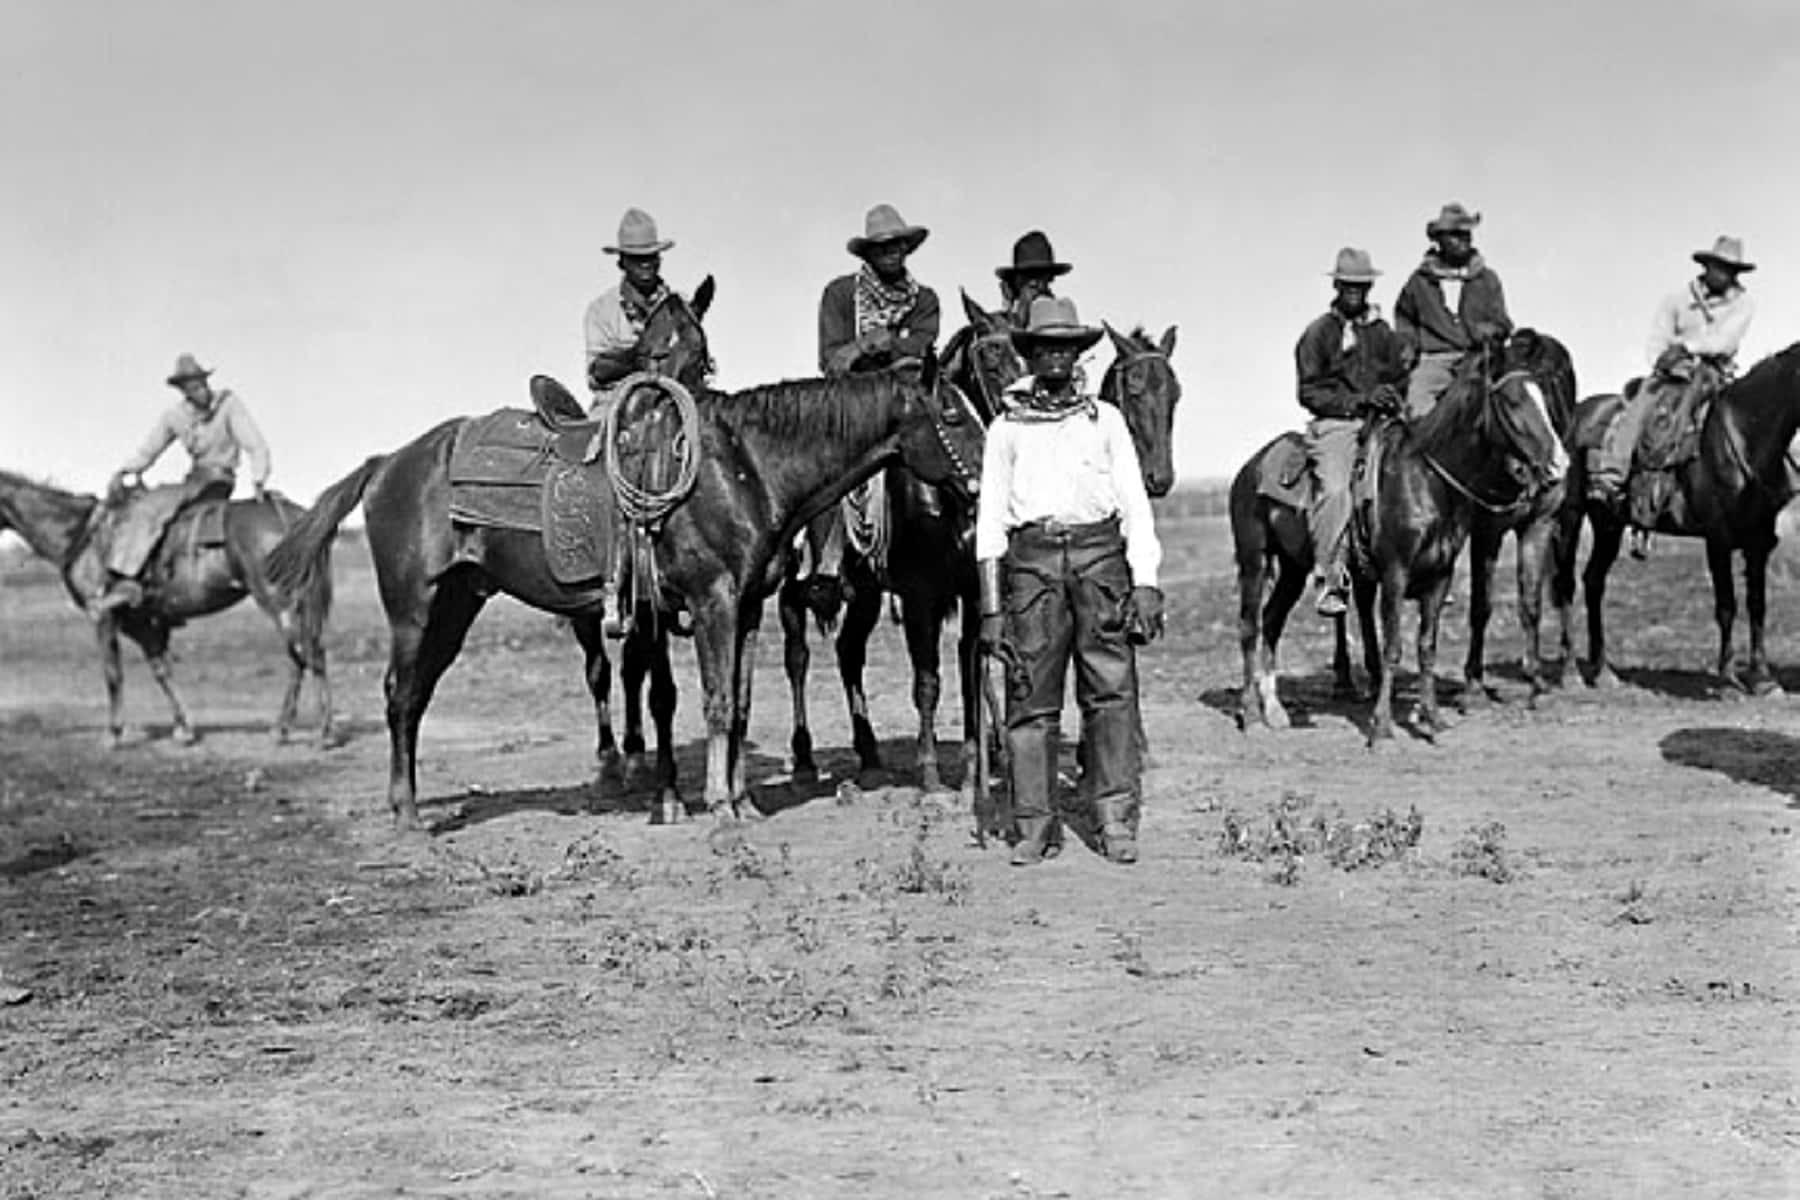 Cowboys Without Borders' tells the story of the American Cowboy